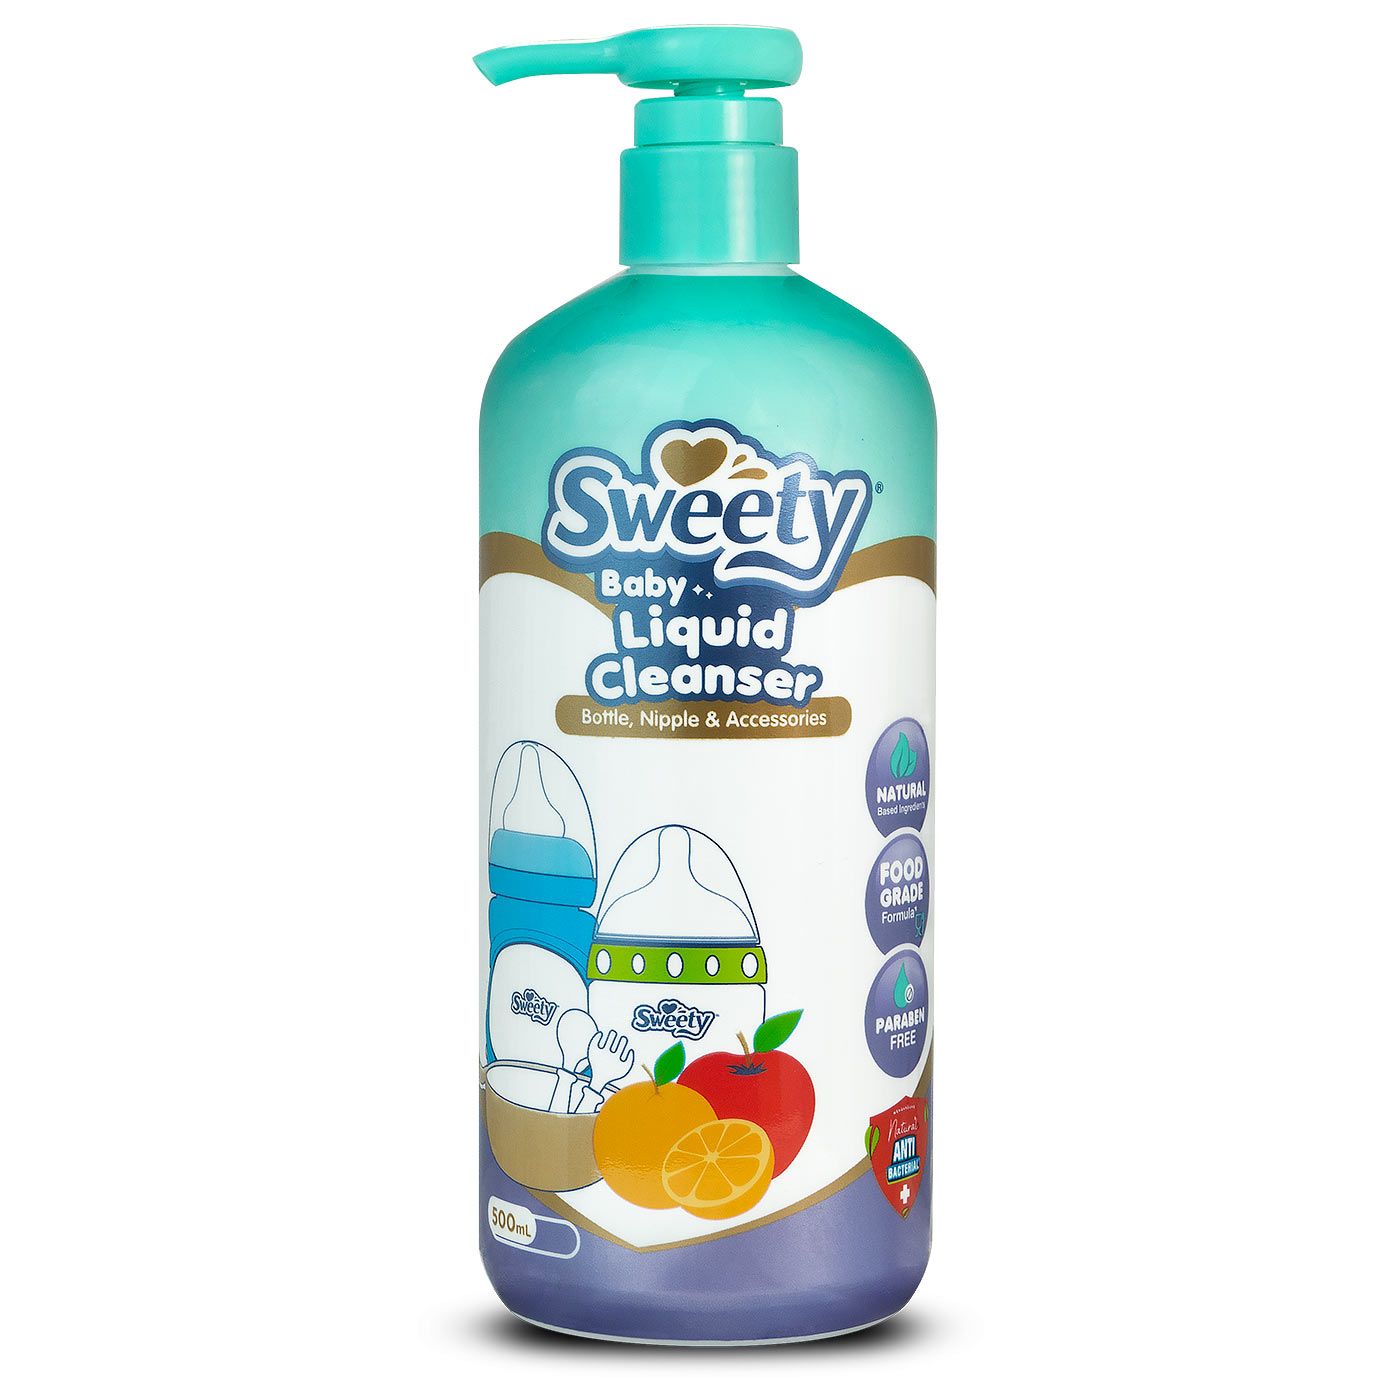 Sweety Baby Liquid Cleanser  for Bottle, Nipple & Accessories - Bottle 500ml - 1